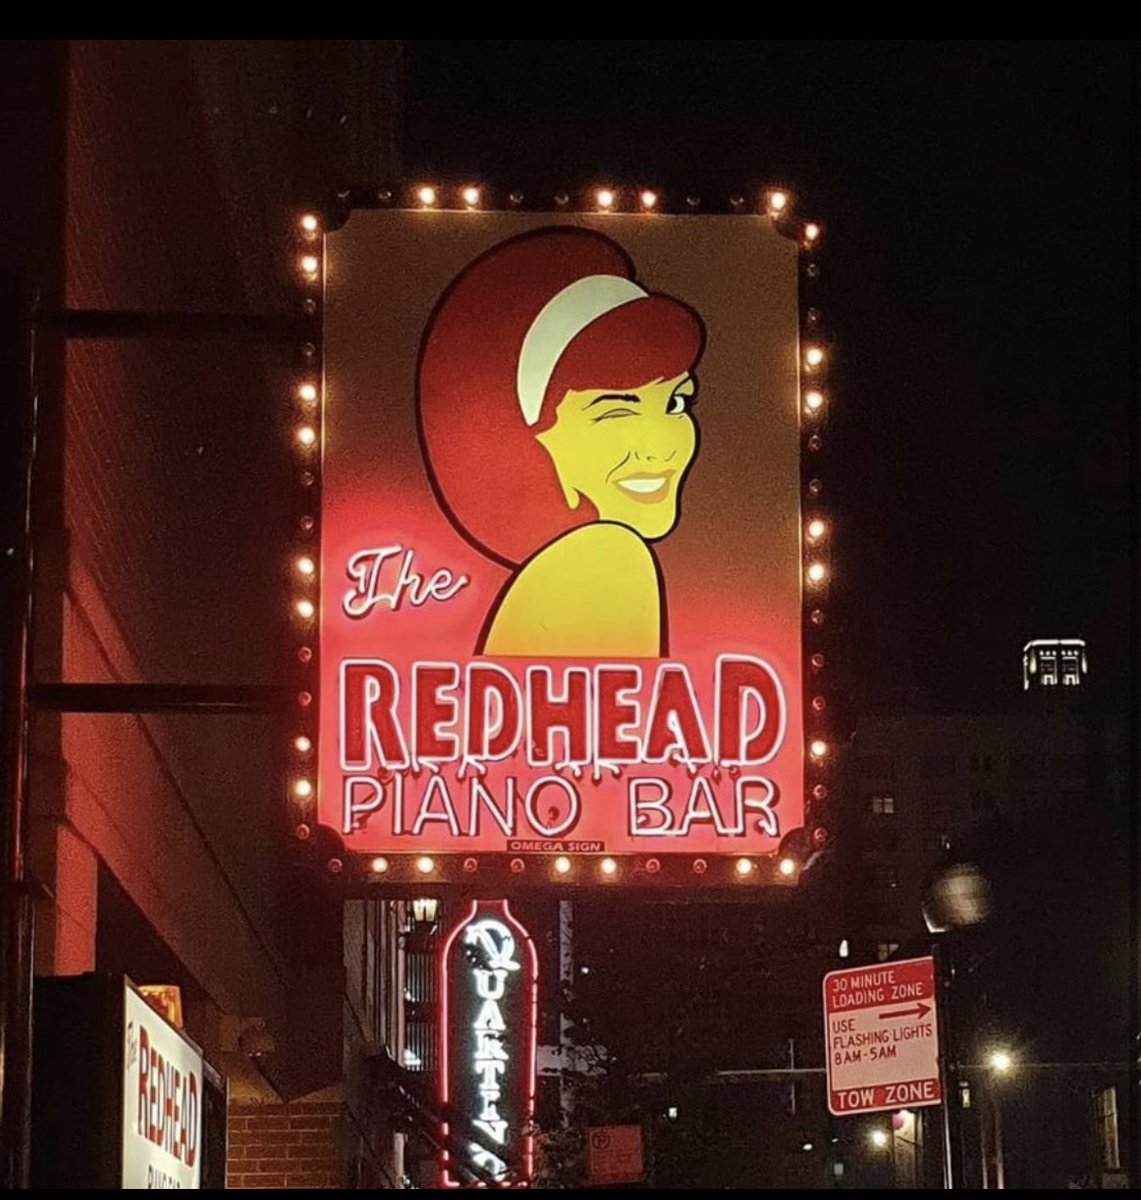 This post is your ✨ sign ✨ to visit the The Redhead! ❤️ 🎹 . #RedheadPianoBar #LMGChicago #Chicago #LiveMusic #ChicagoBars #YourFavoriteRedhead #PianoBar #ChooseChicago #InfatuationChi #ChicagoHappenings #DrinkLocalChicago